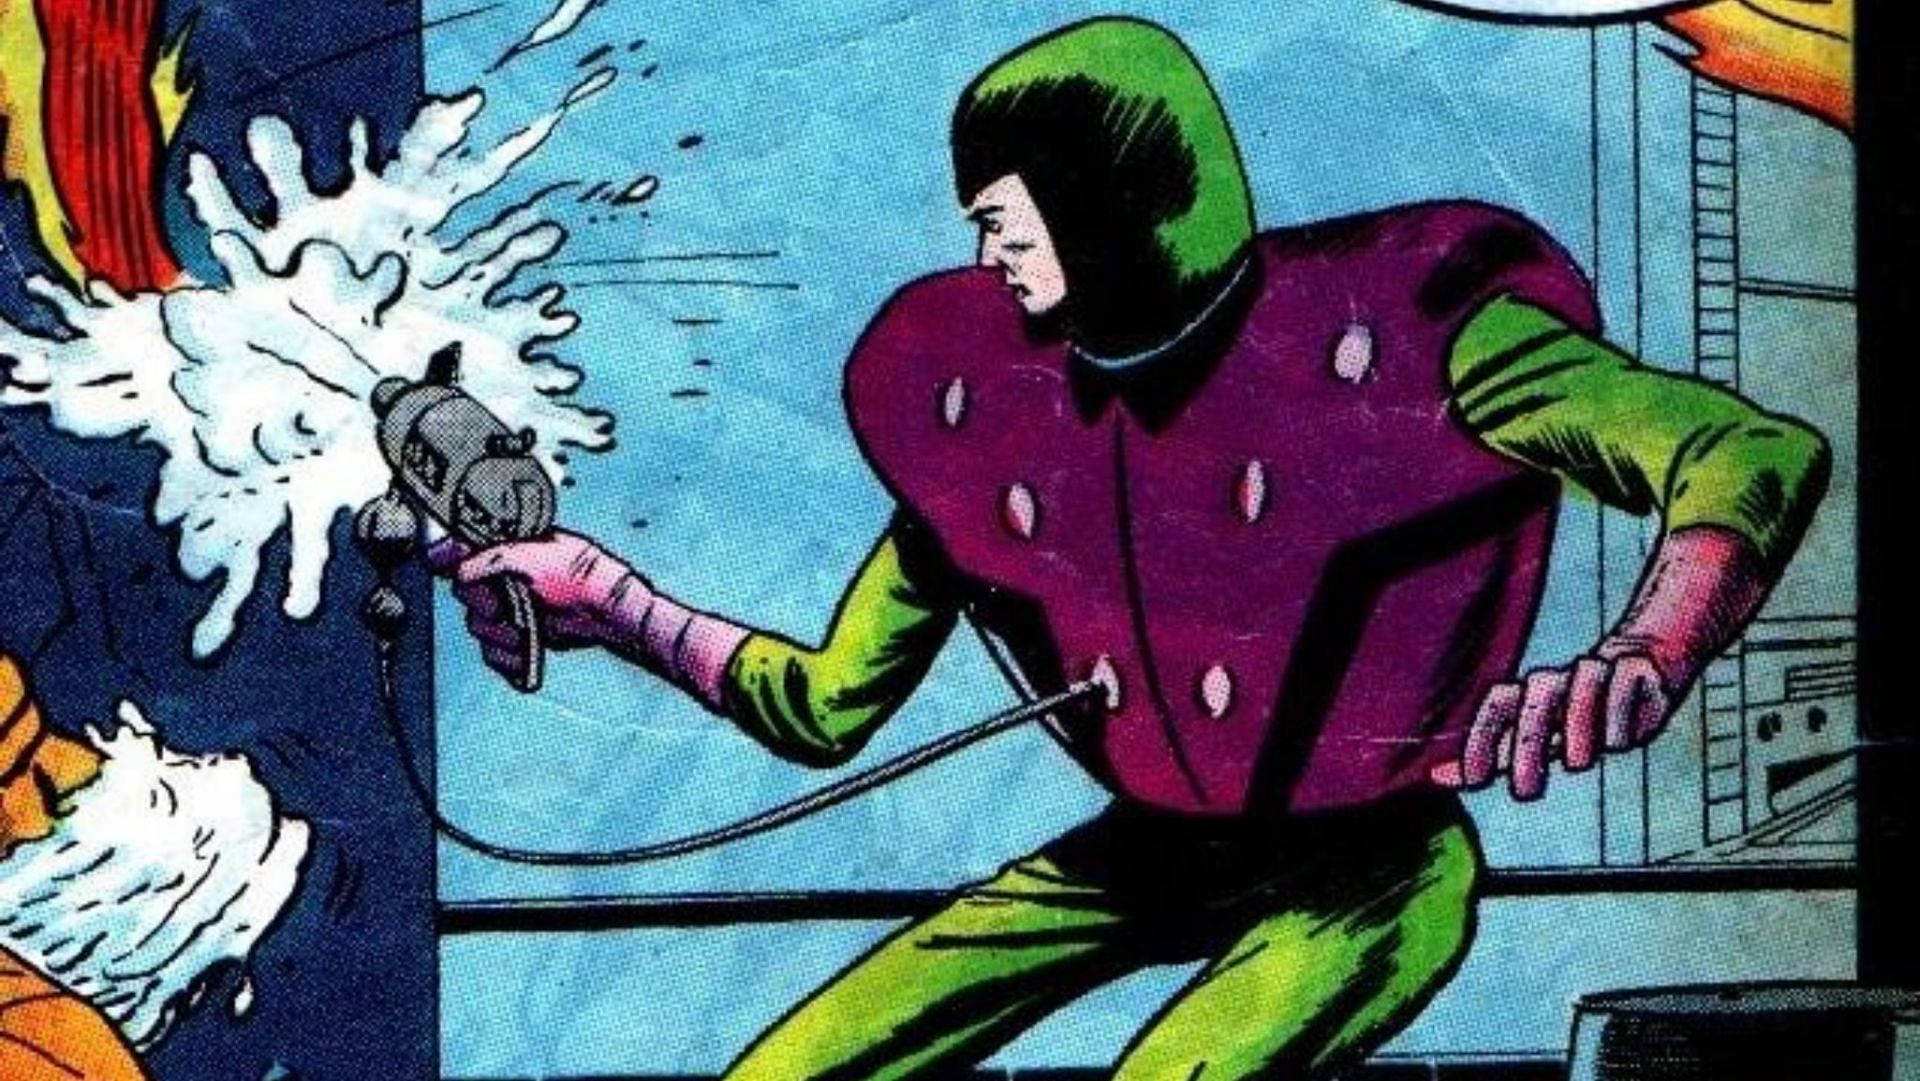 A villain with the ability to shoot adhesive from his gun, but may be too comical and silly for the MCU&#039;s tone (Image via Marvel Comics)